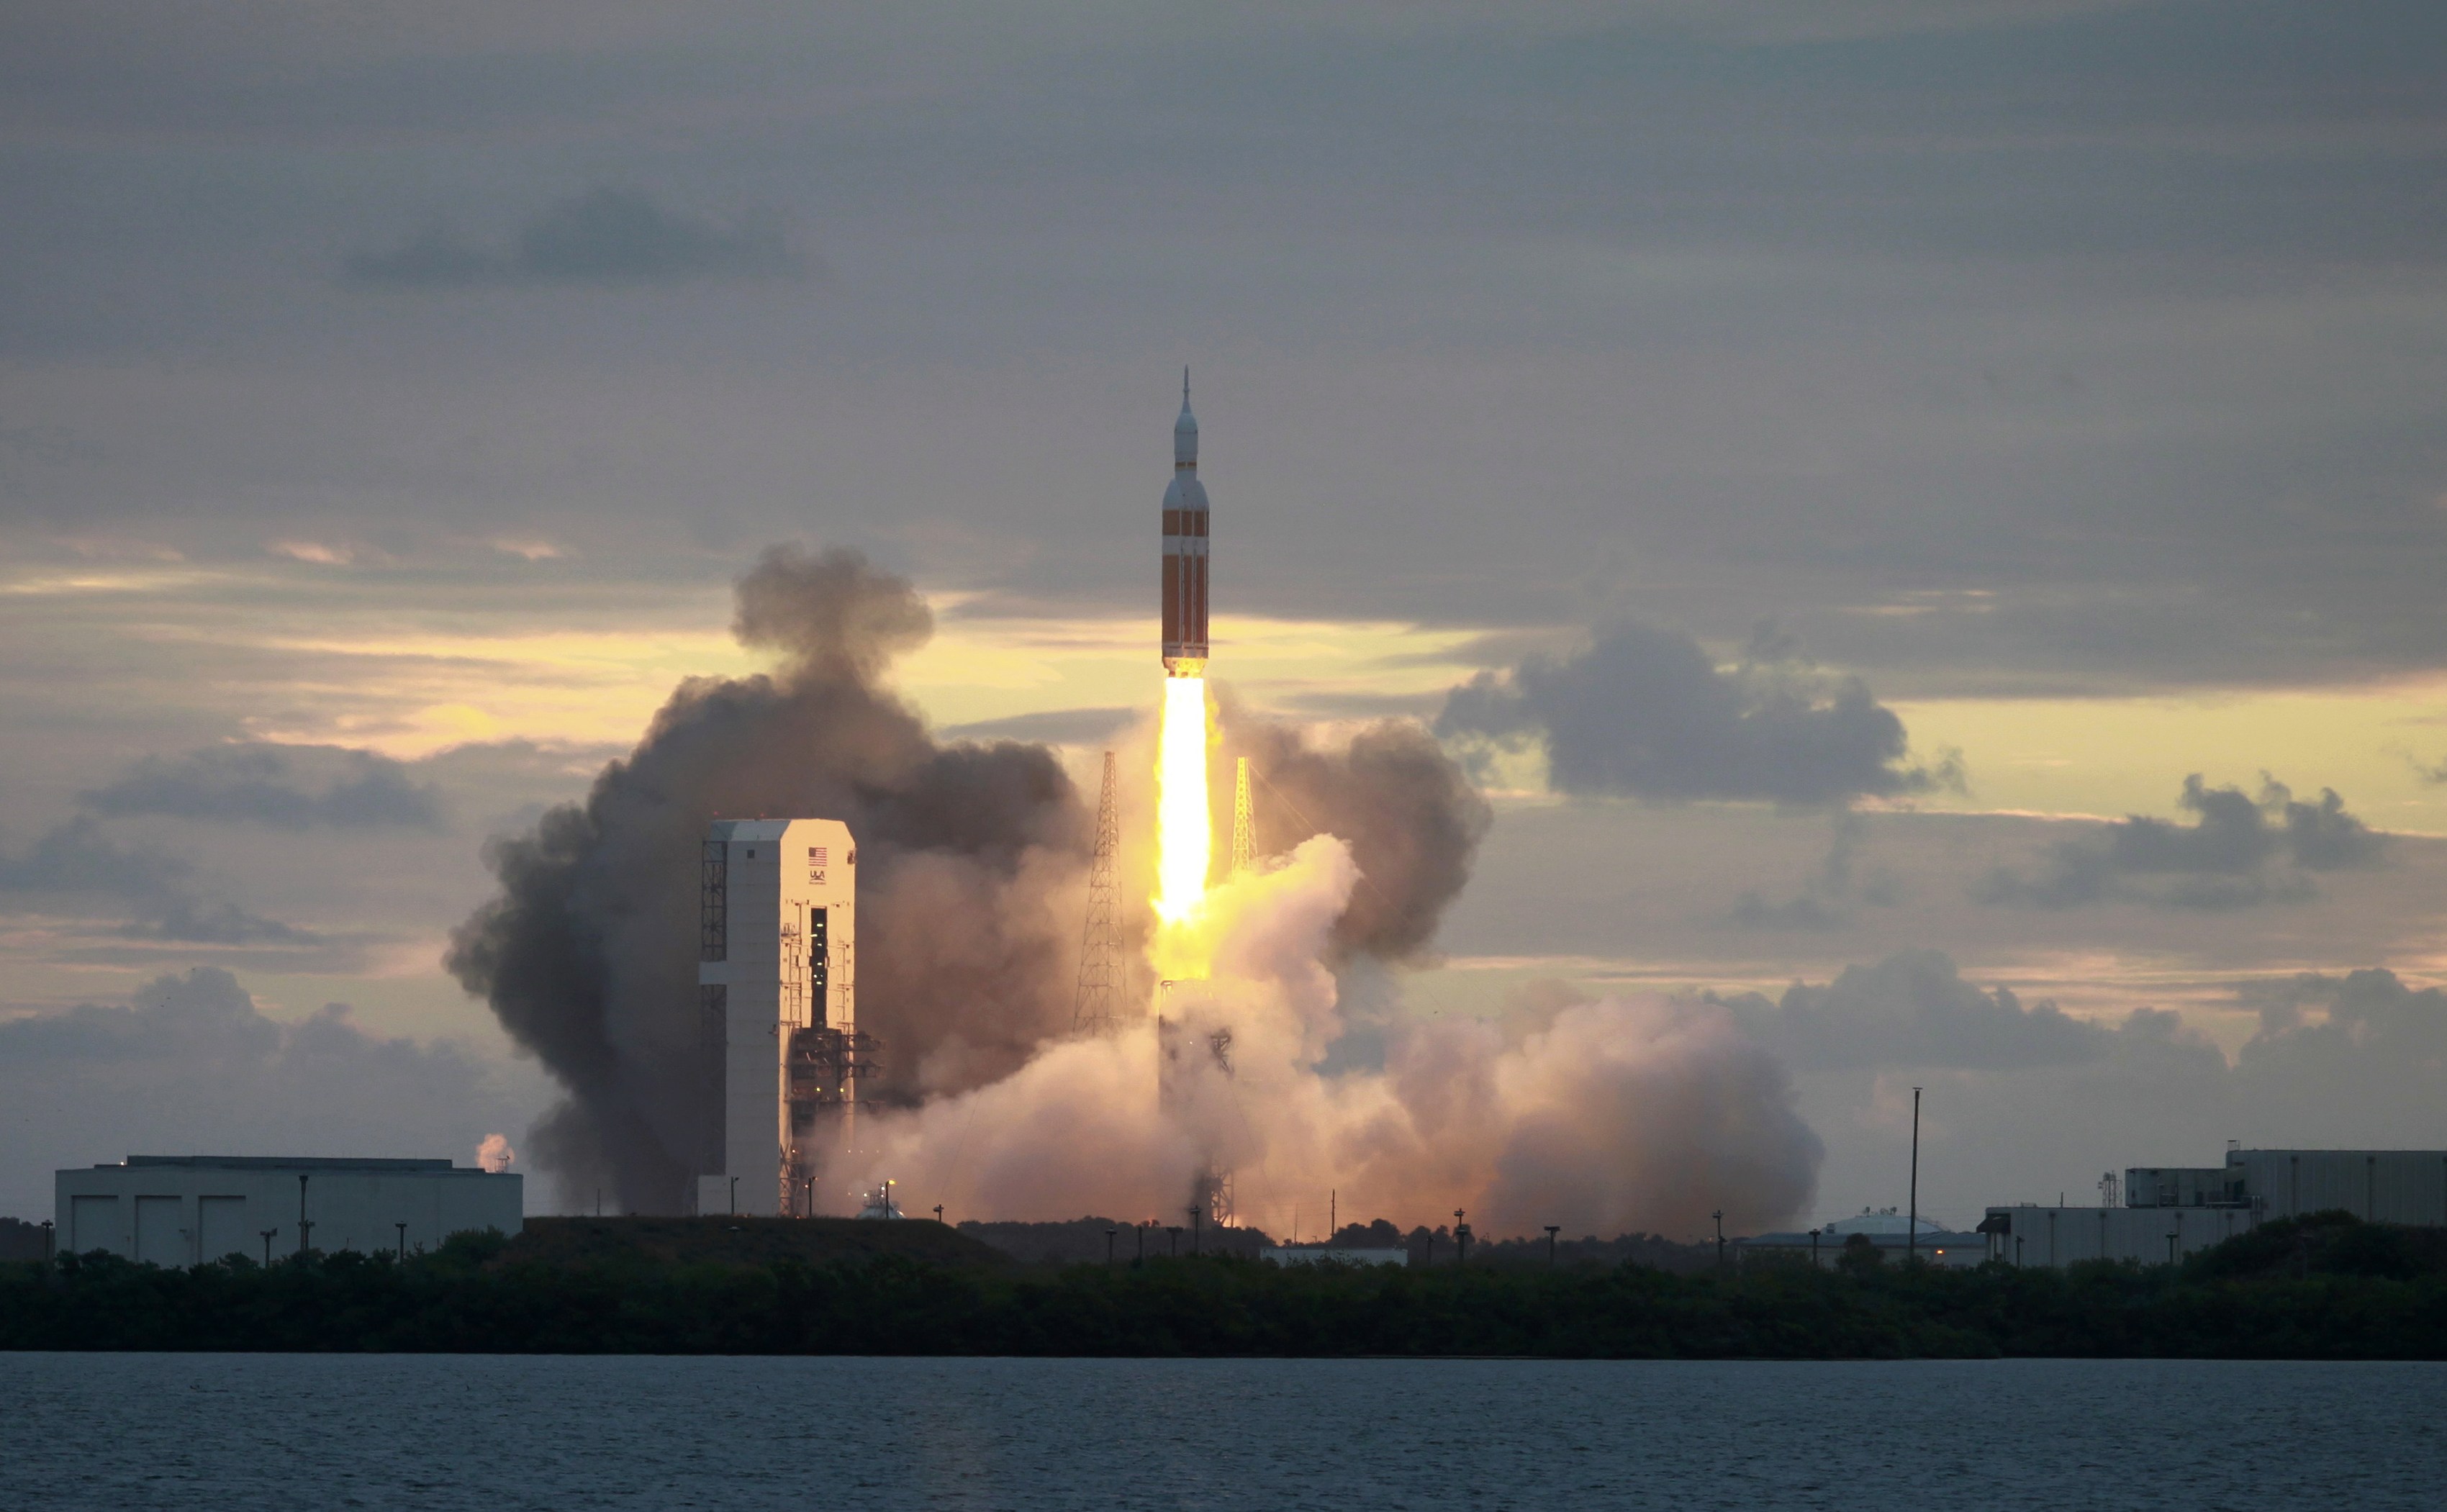 Bucket List: (Travel) Watch launch of spacecraft. | Things I have ...